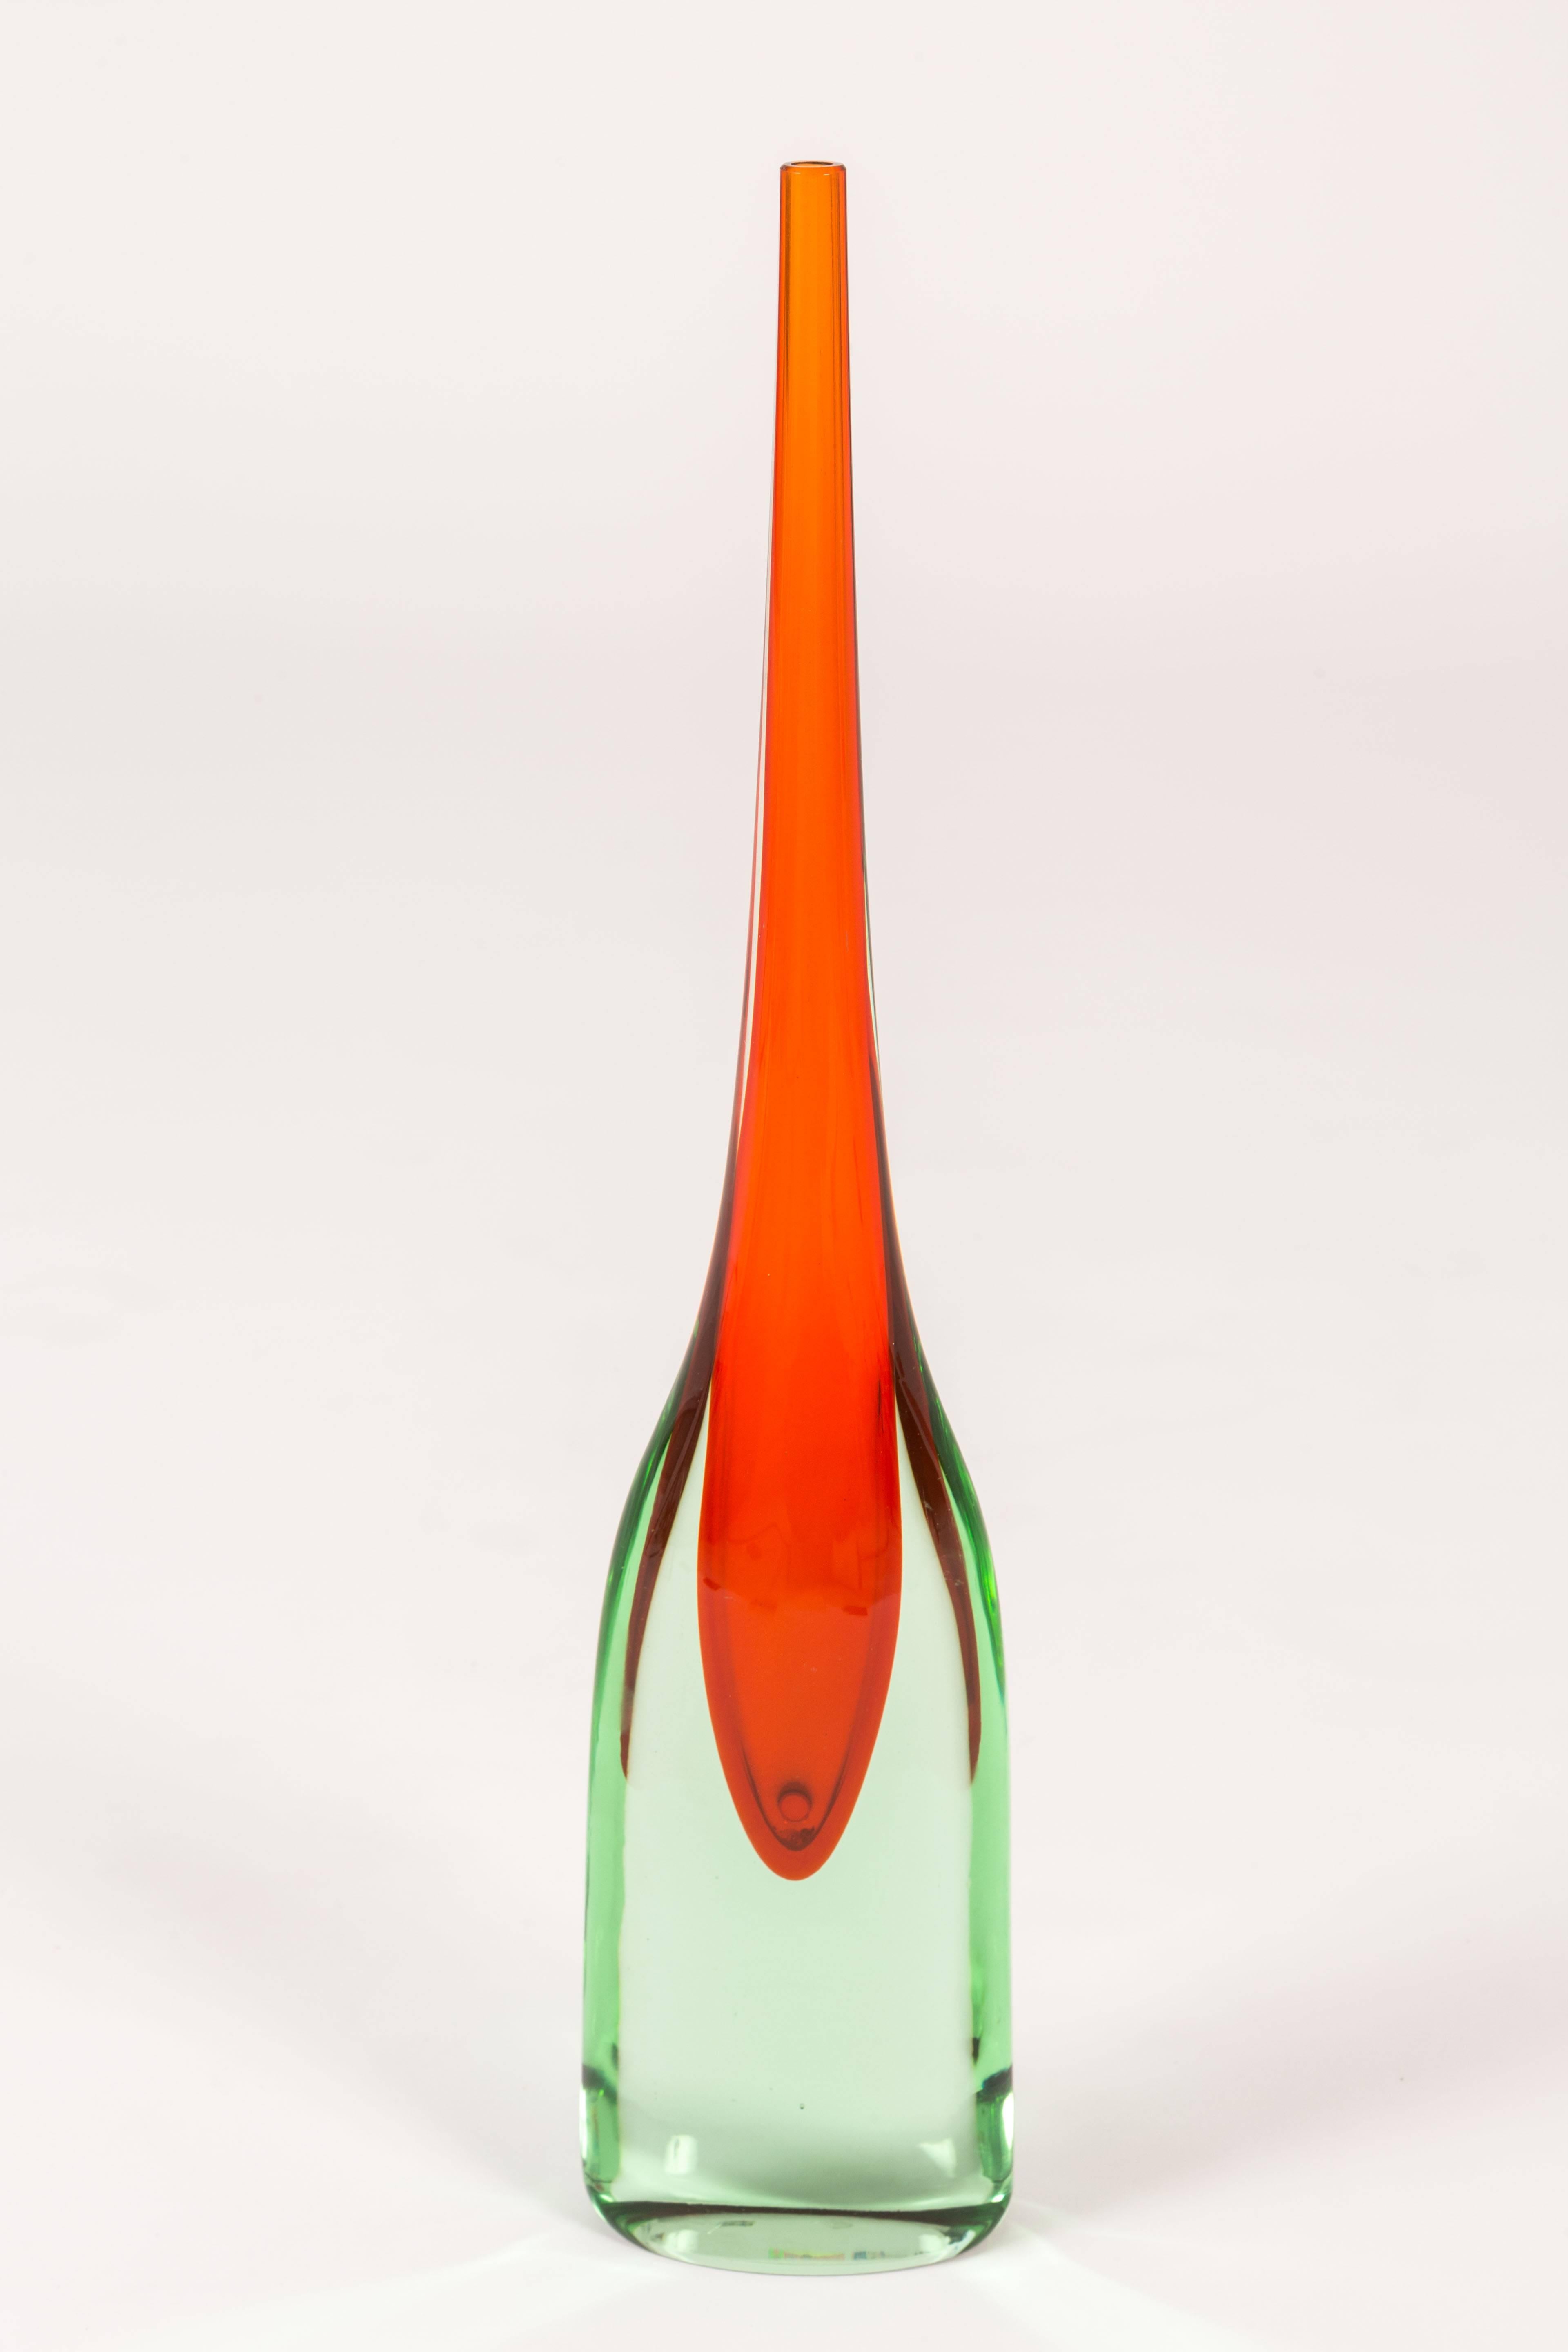 A tall and striking Murano glass vessel with an elongated neck. The glass is a pale green with orange interior.